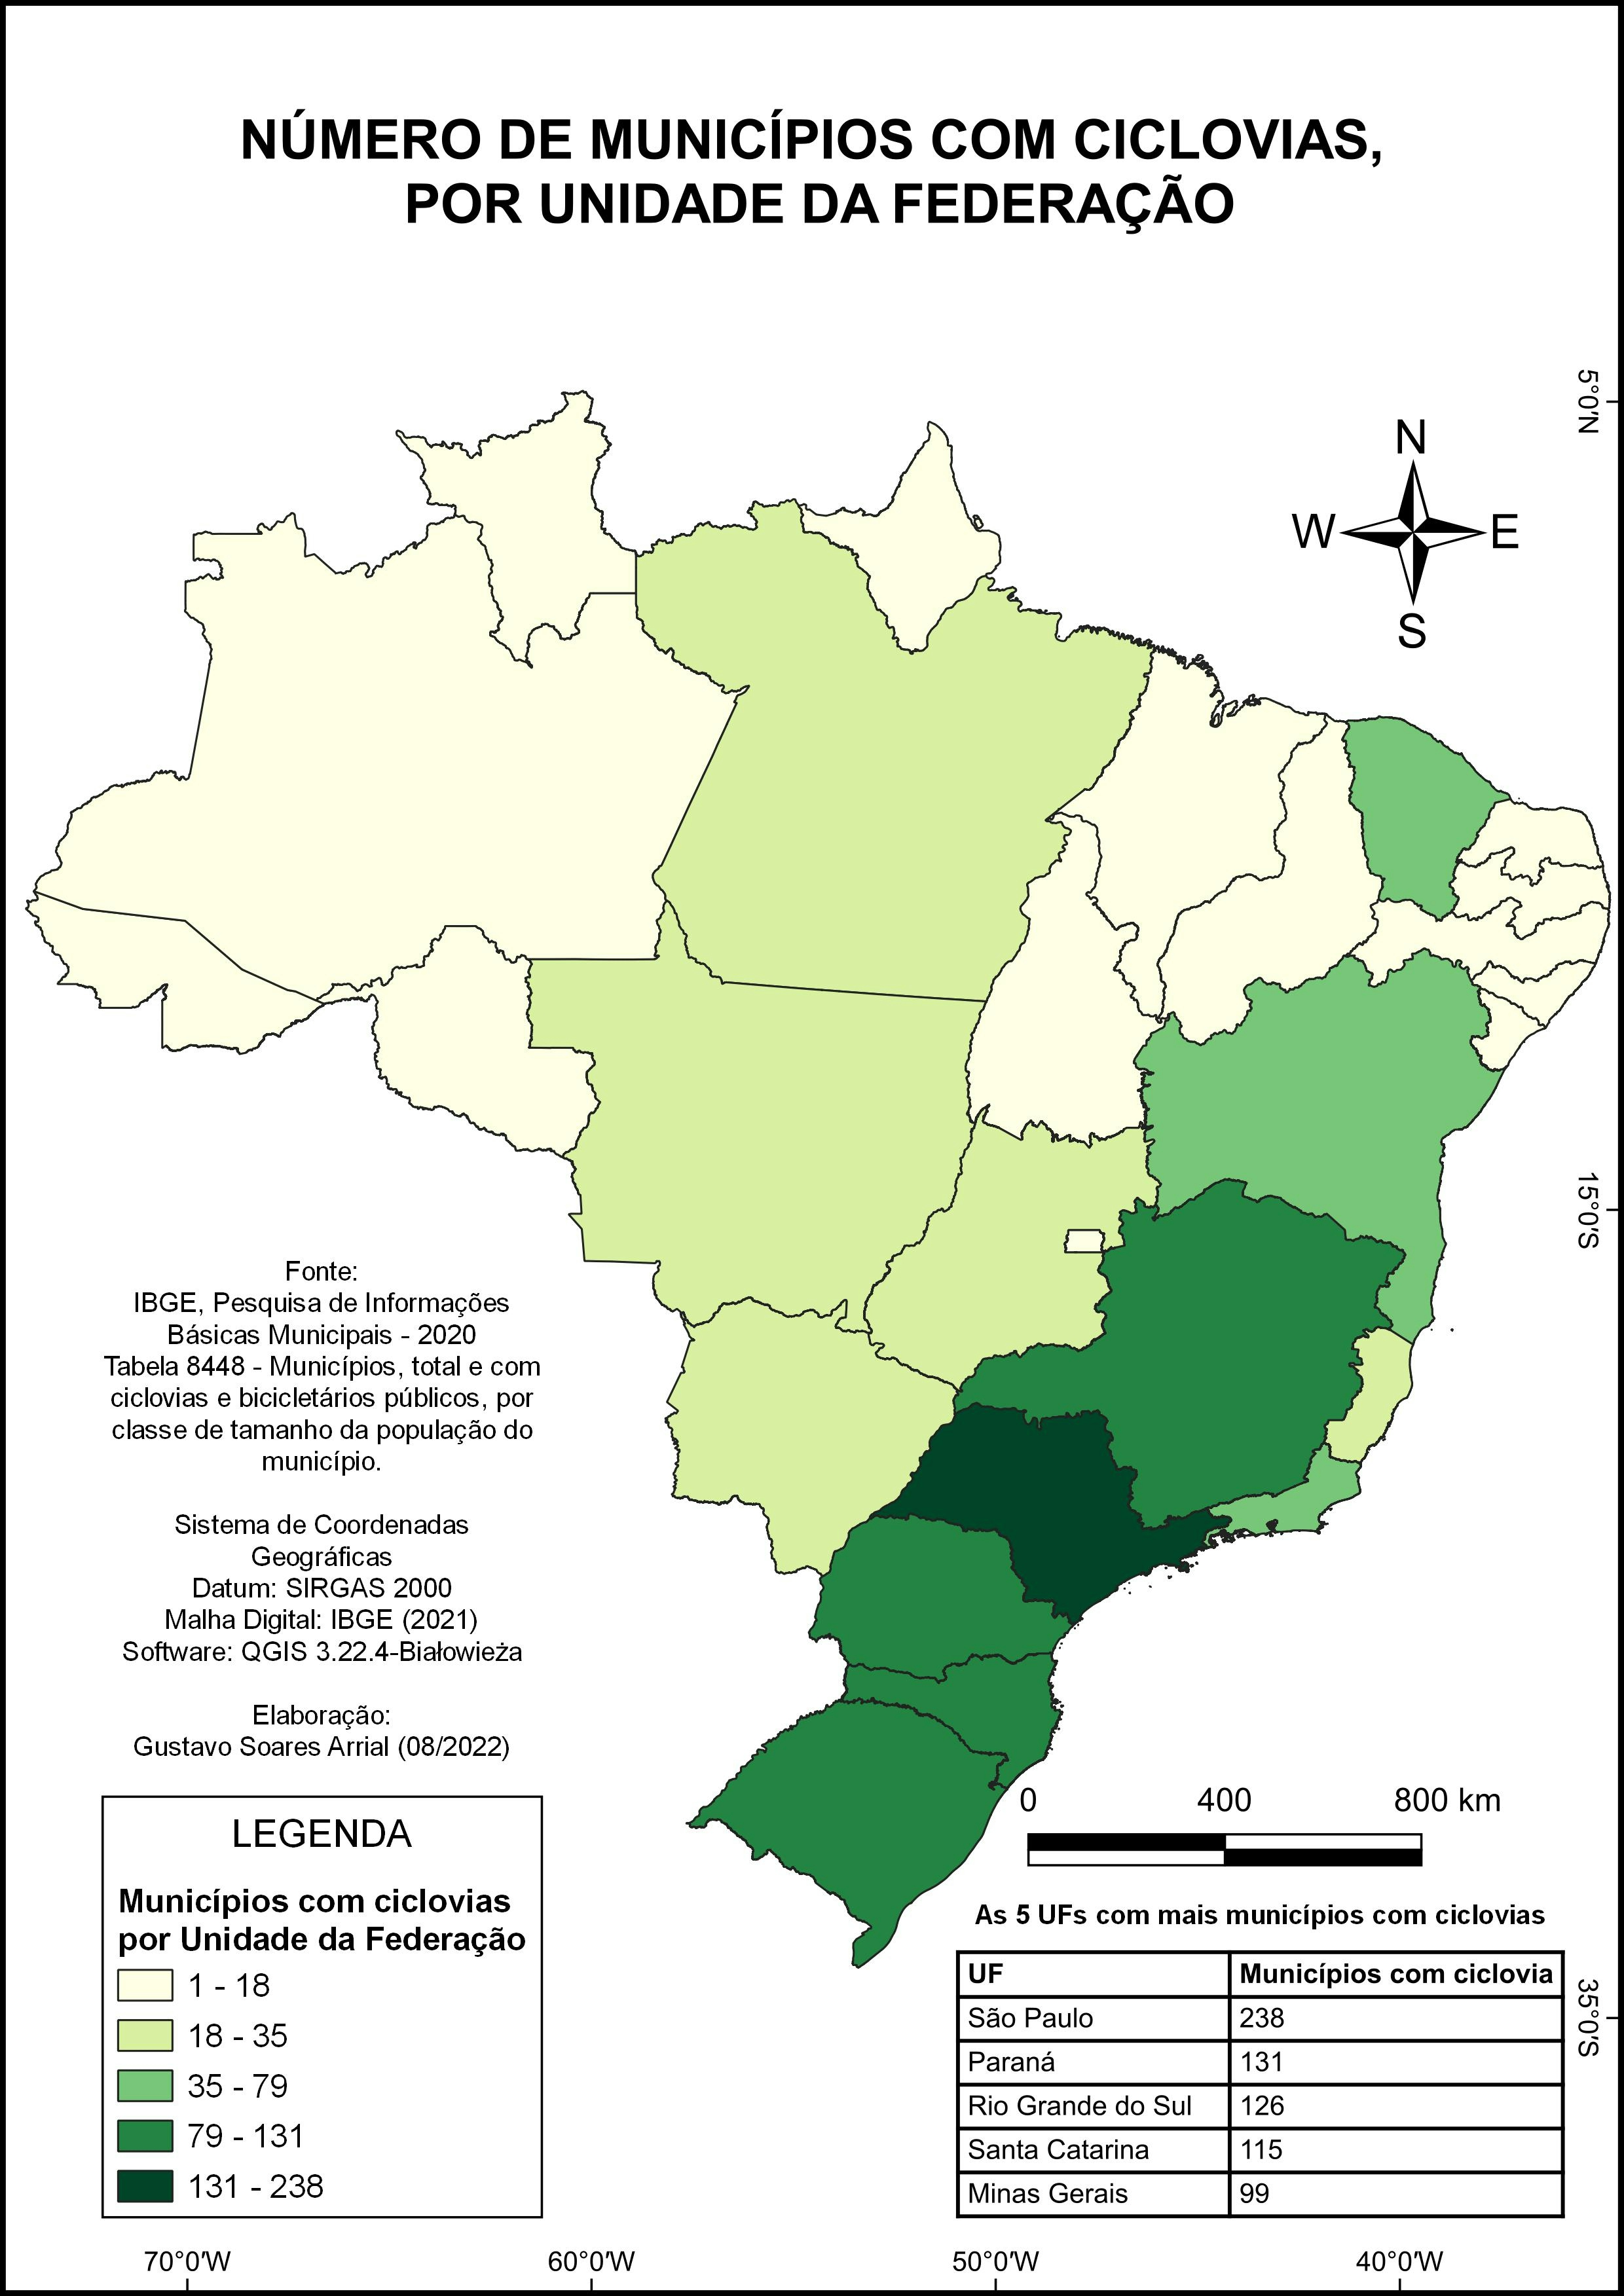 Cities with bike lanes in Brazil, states